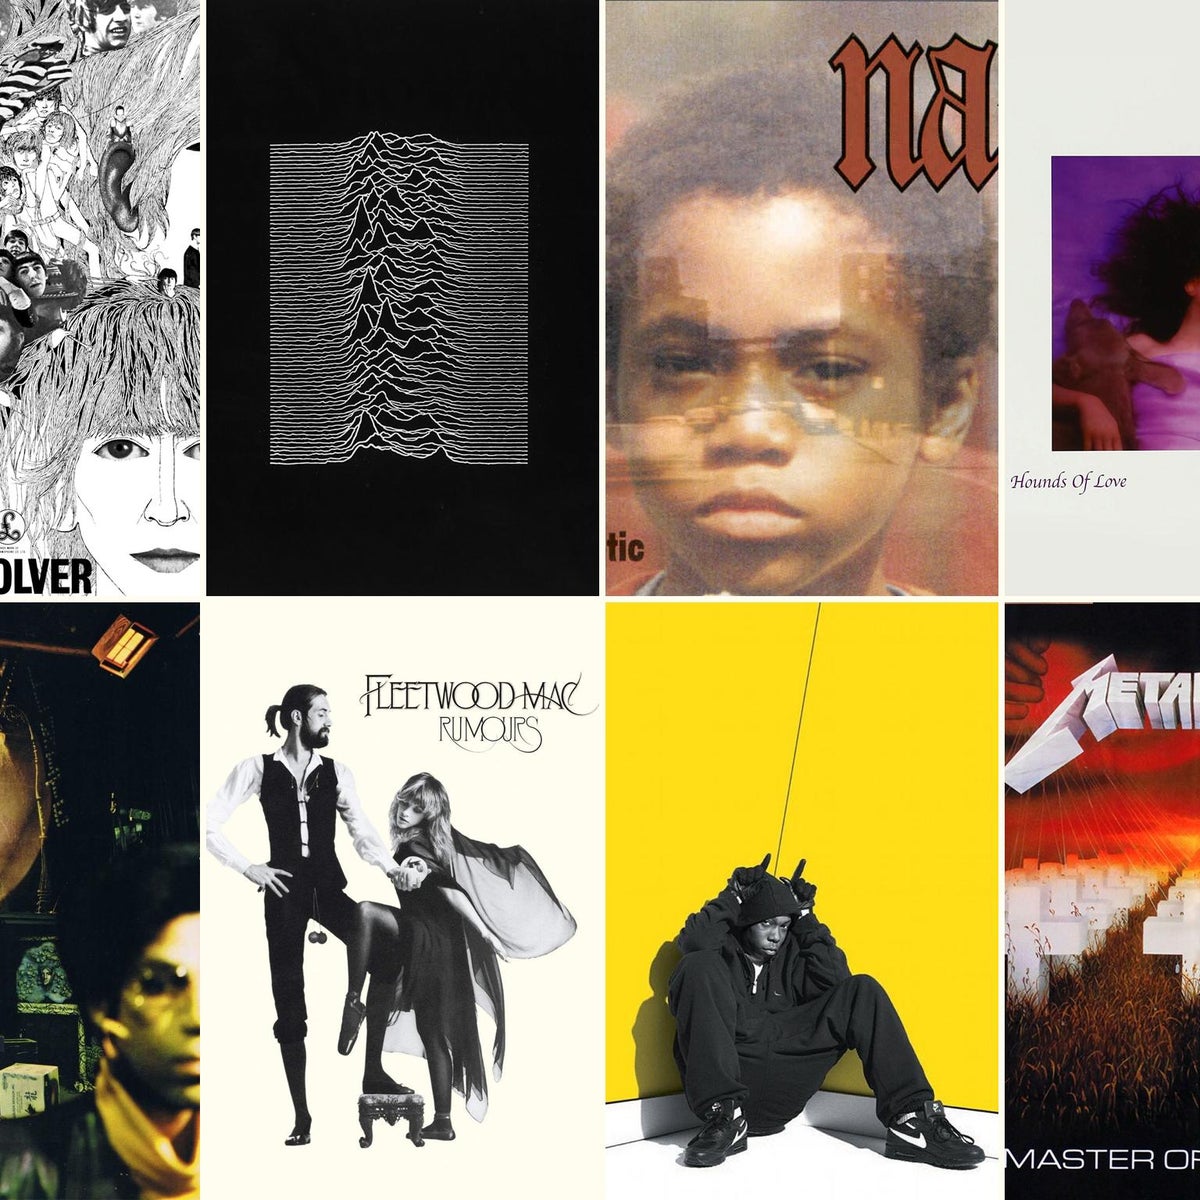 40 essential albums to hear before you die